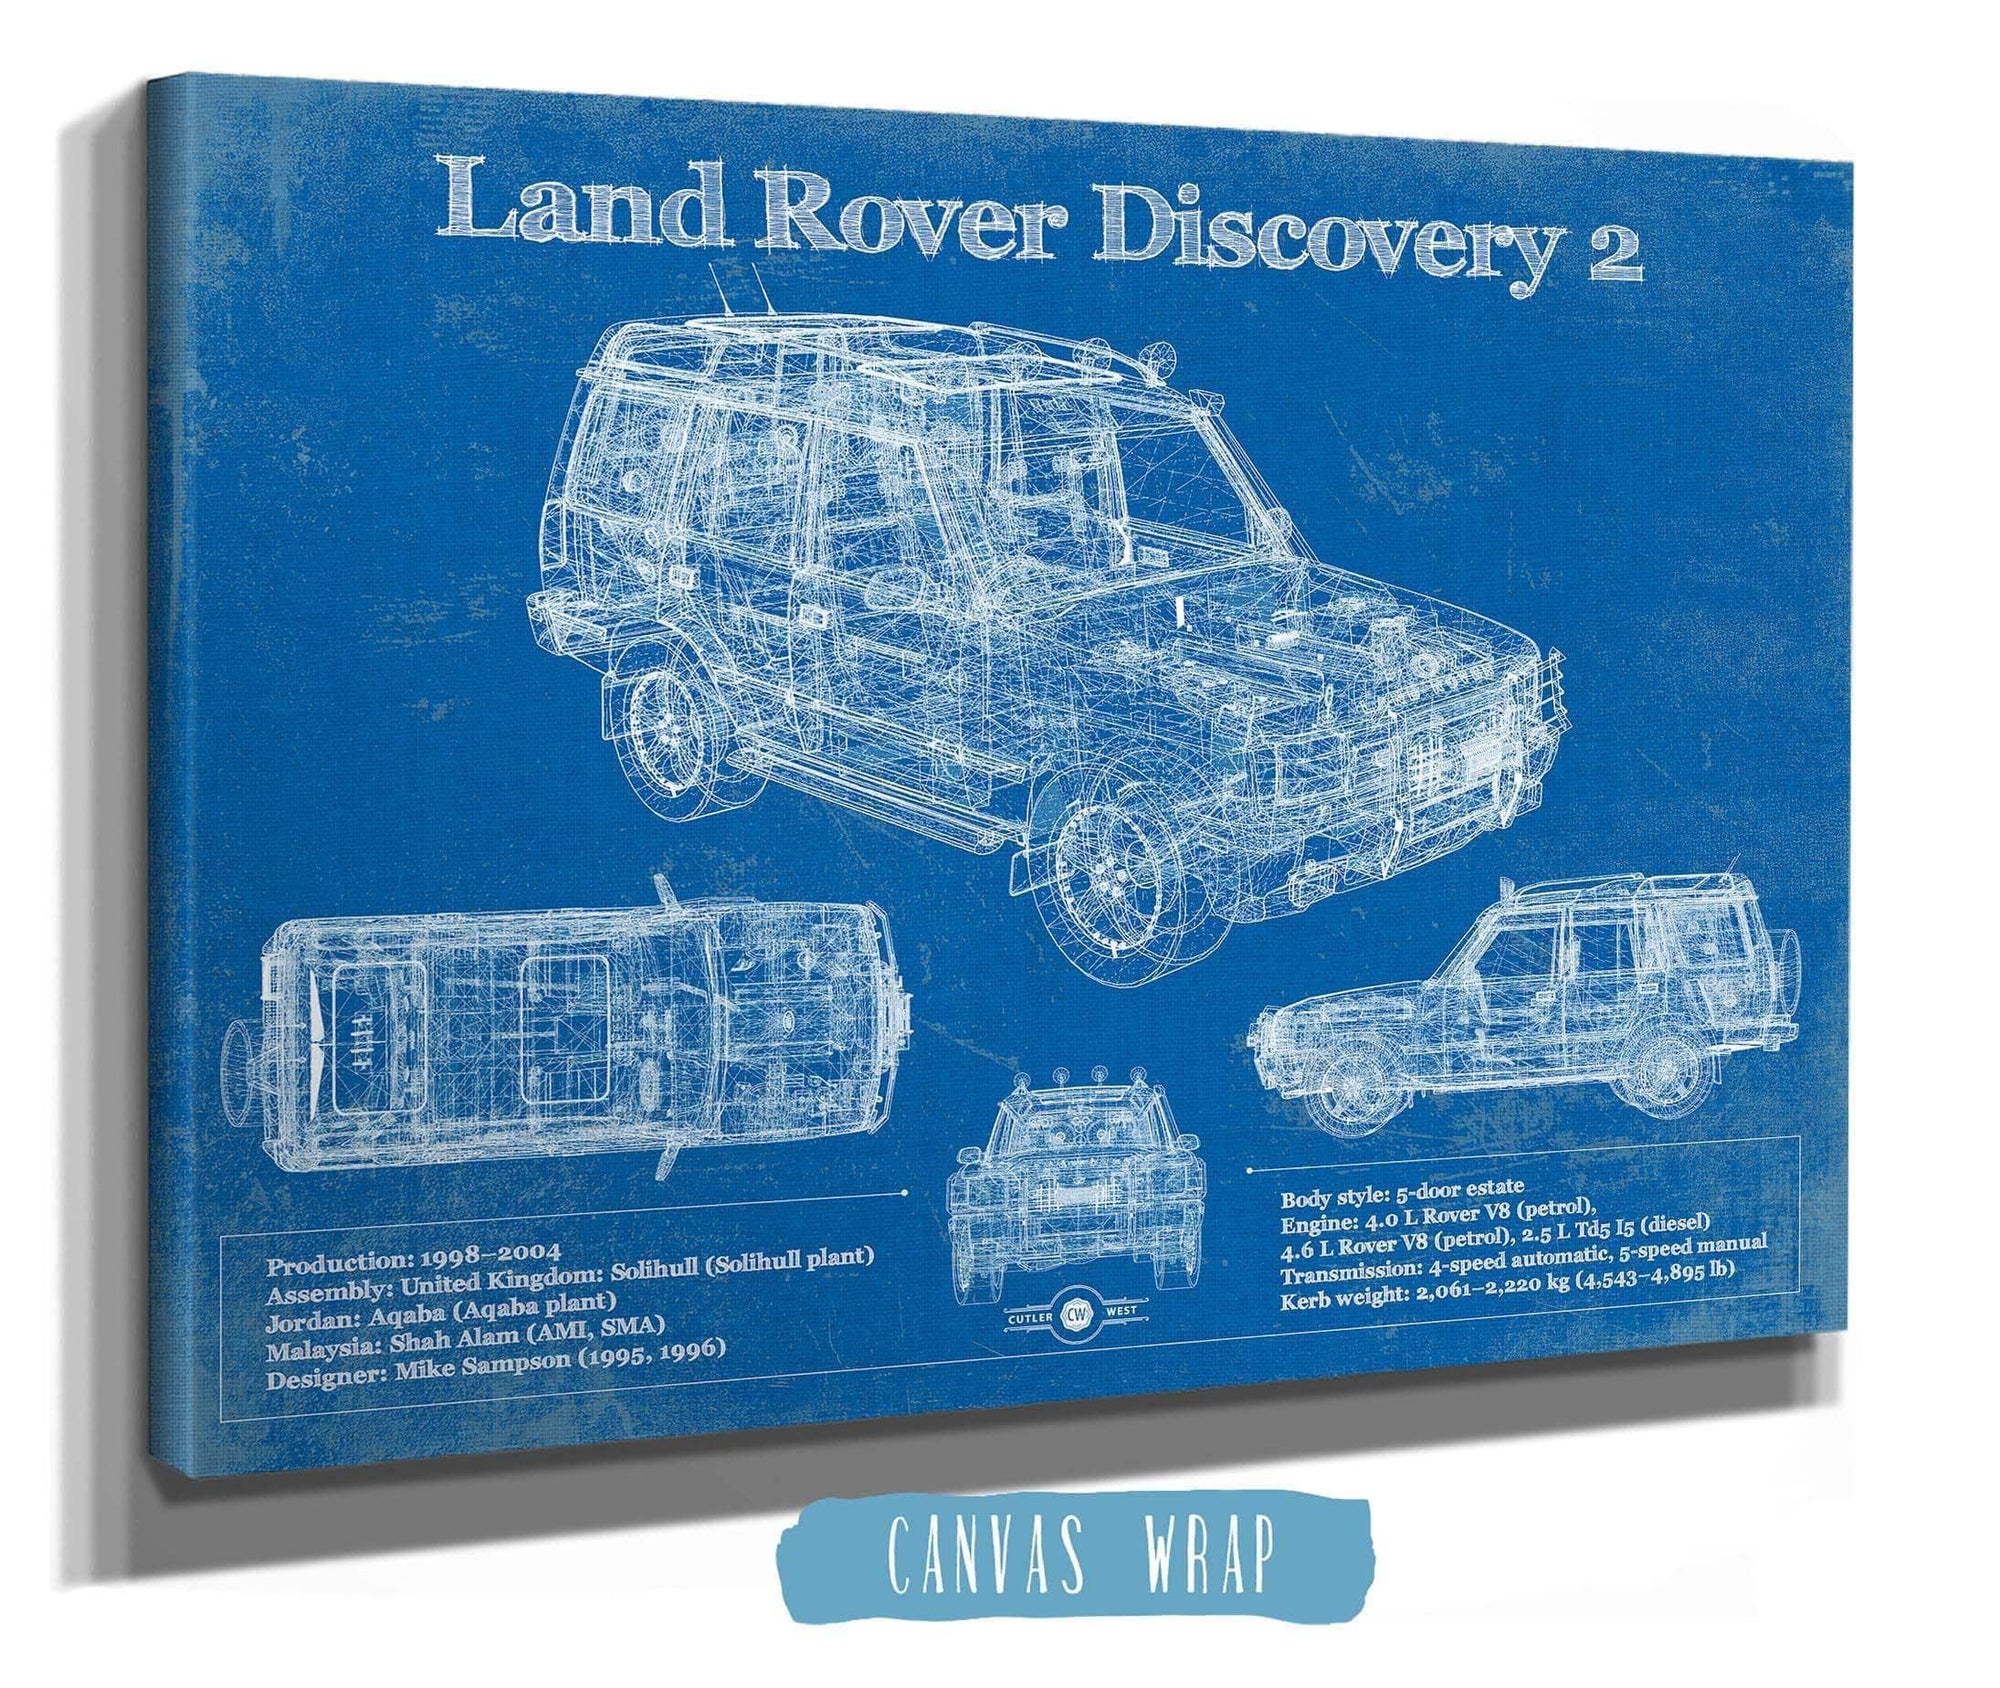 Cutler West Land Rover Collection Land Rover Discovery Series 2 Blueprint Vintage Auto Patent Print